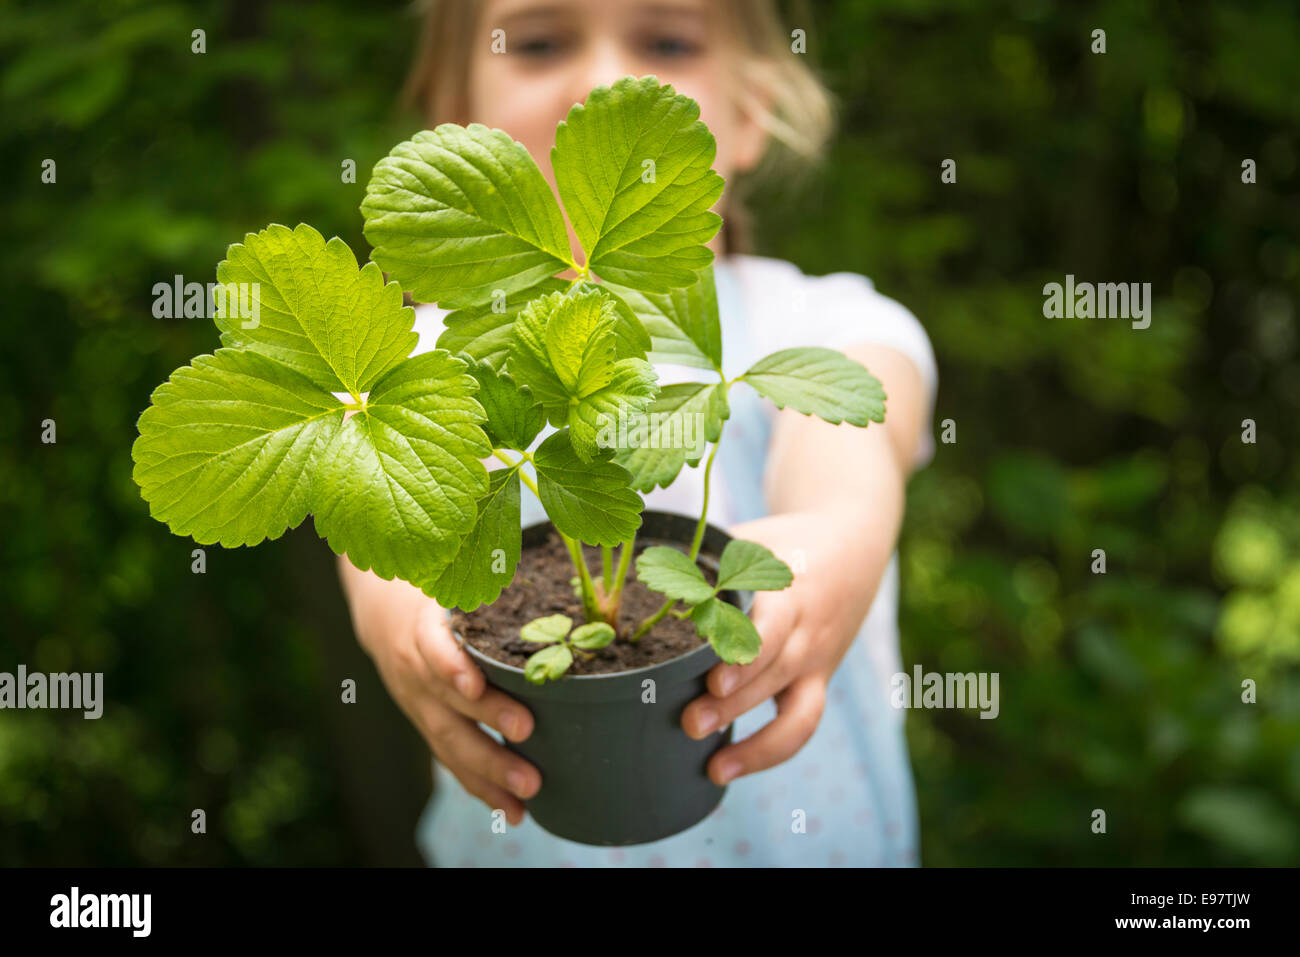 Girl gardening, holding potted plant Banque D'Images